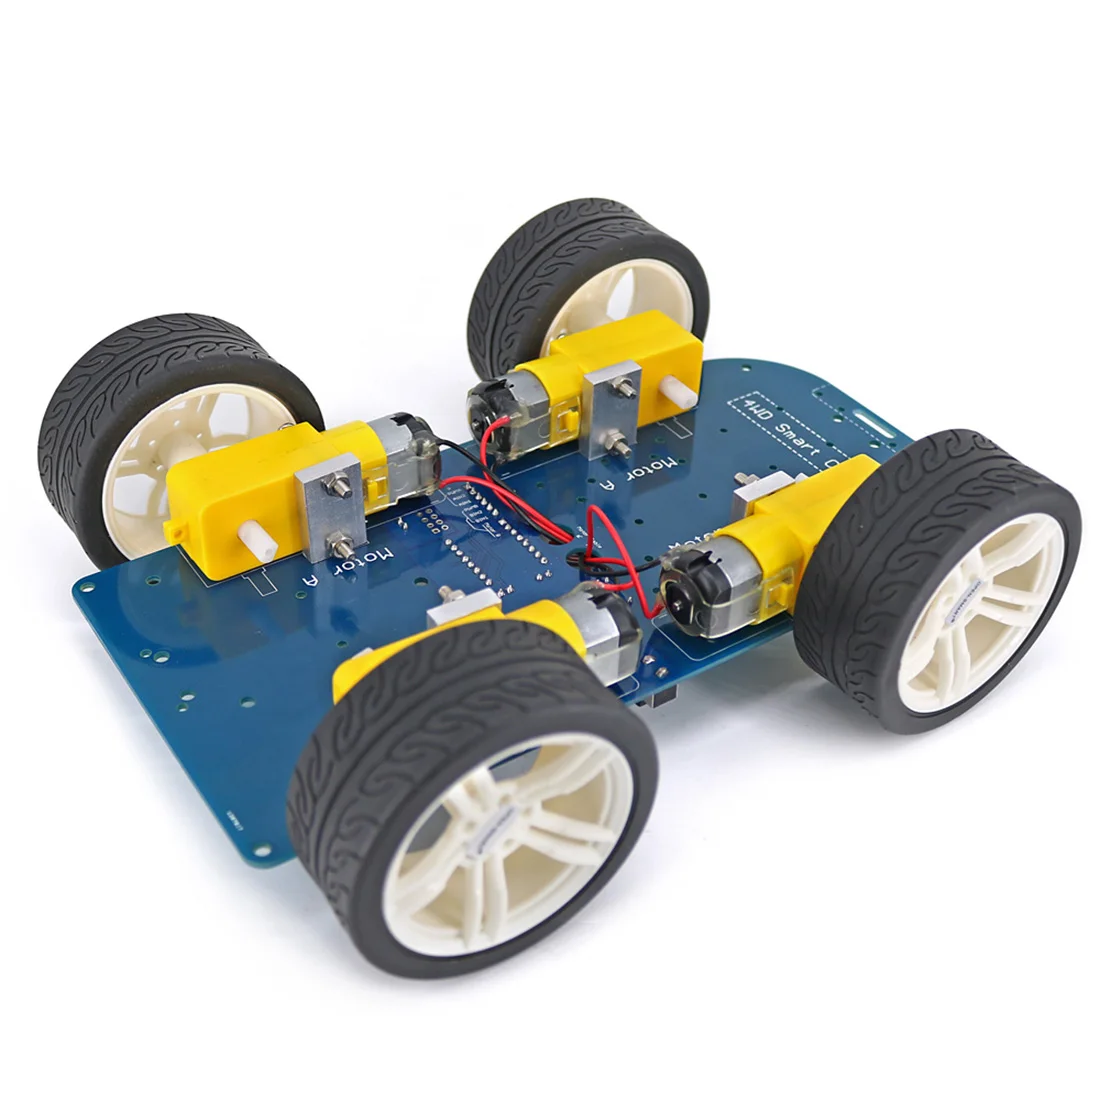 Four-wheel Drive Bluetooth Intelligent Chassis